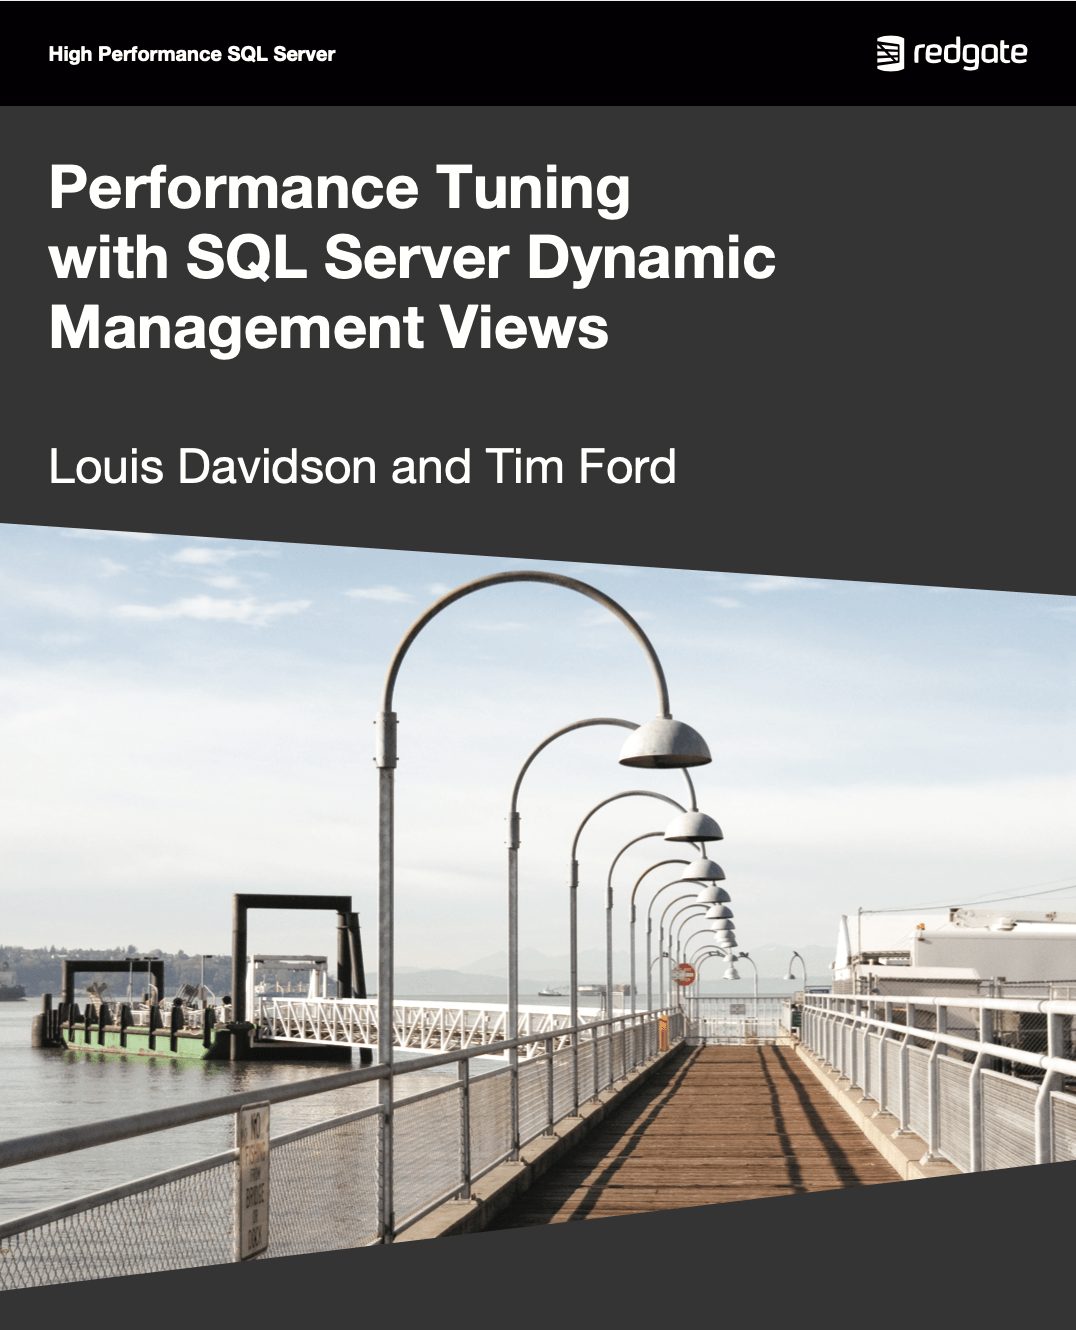 Performance Tuning with SQL Server Dynamic Managment Views eBook cover